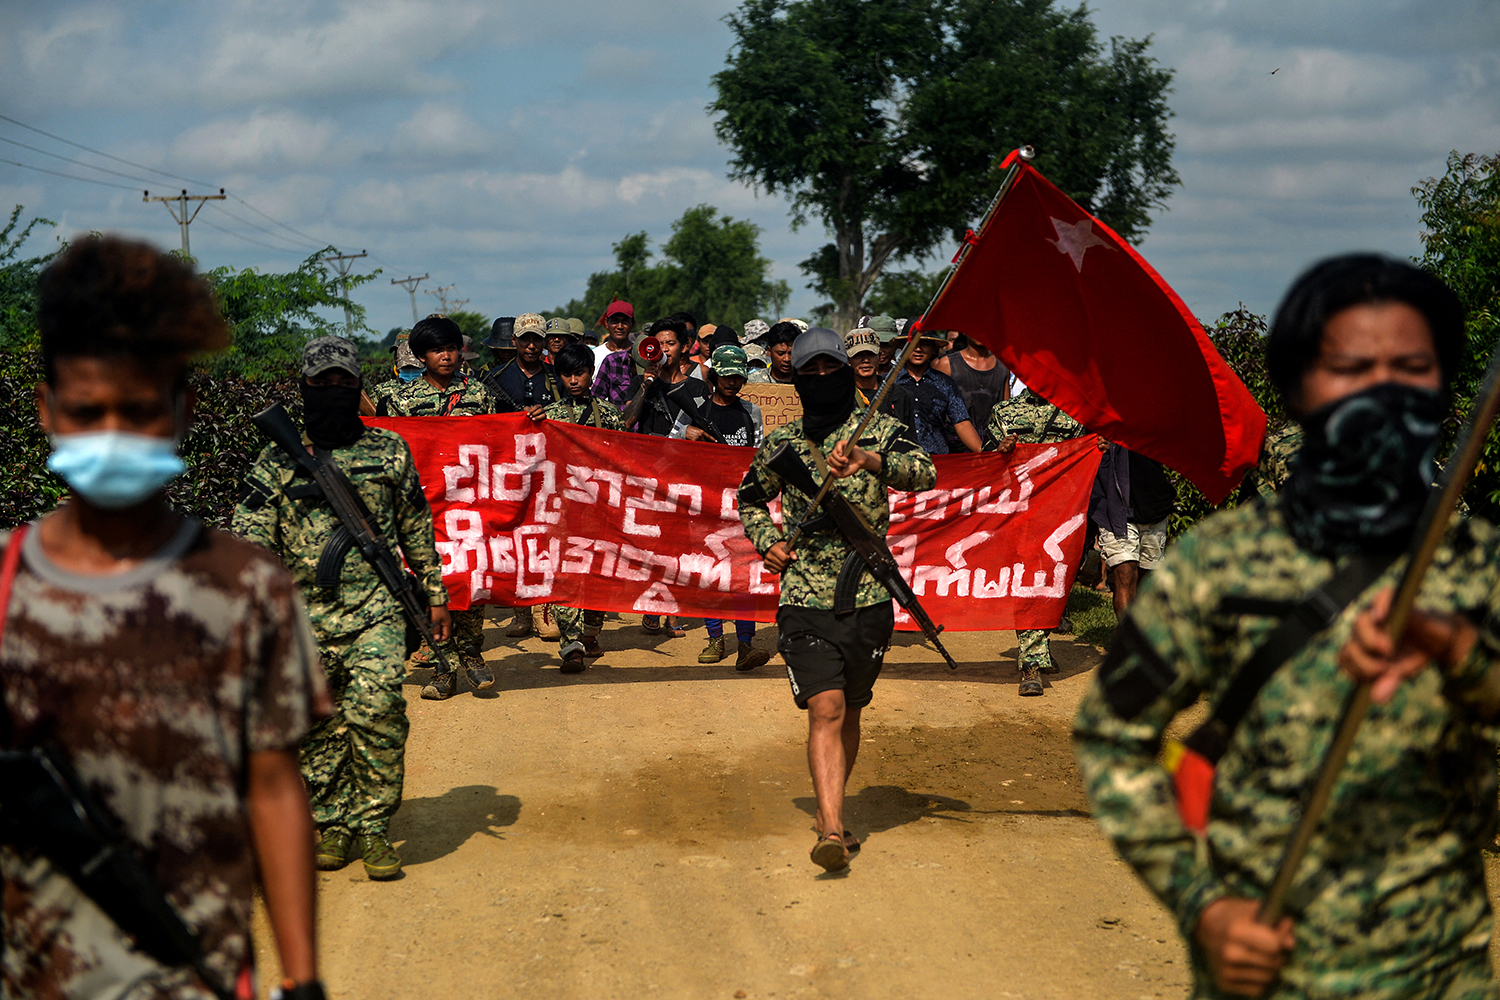 Anti-coup fighters escort protesters at a demonstration against the military in Sagaing Region on September 7, 2022. (AFP)